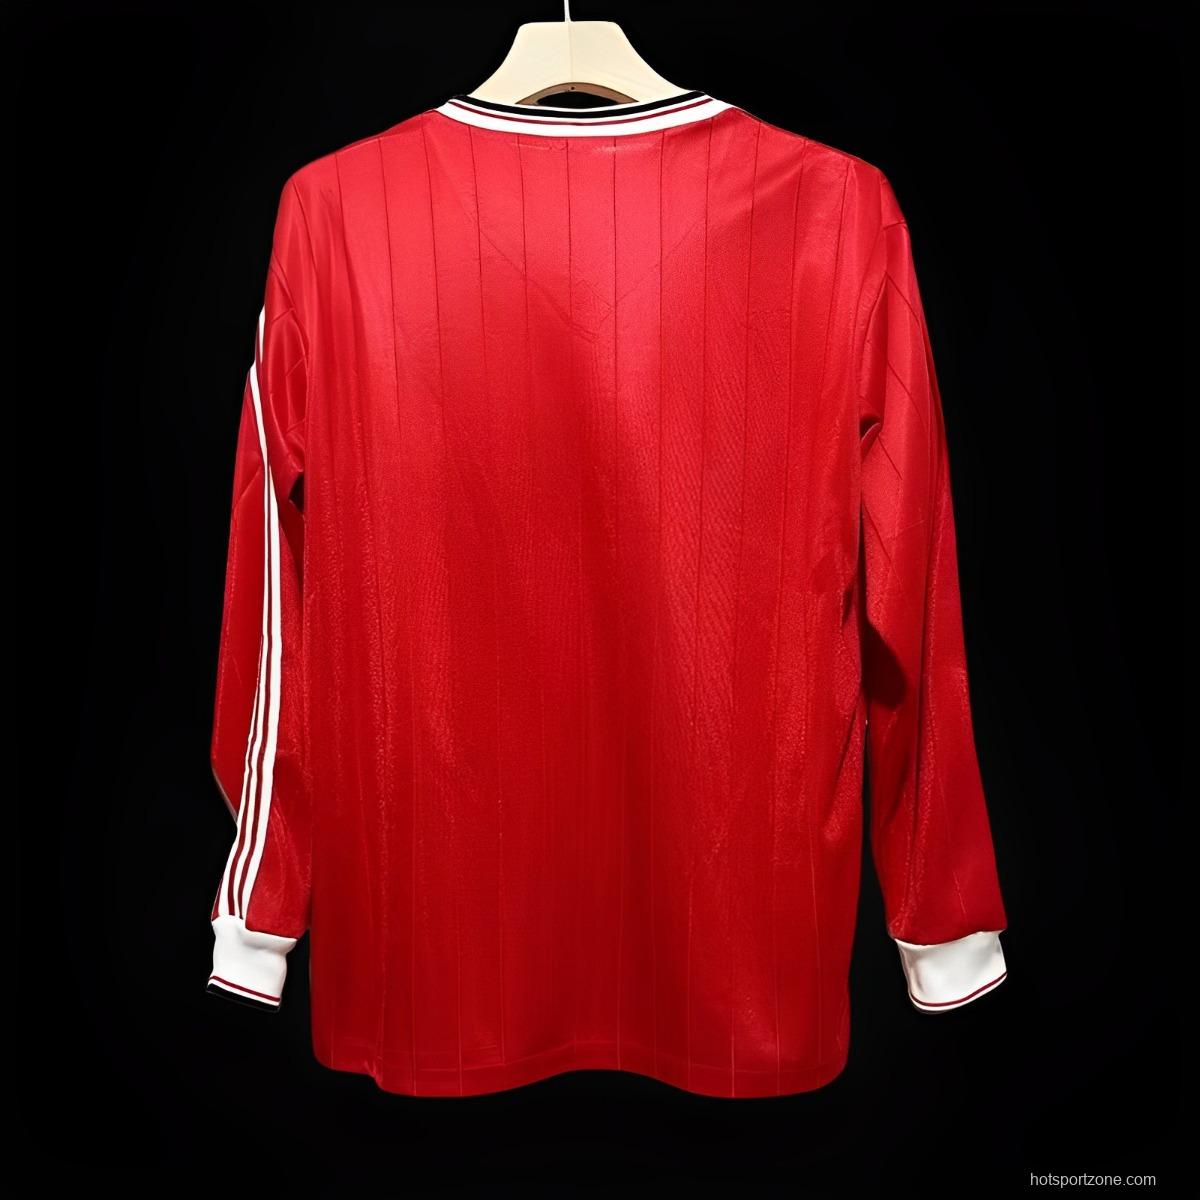 Retro 82/83 Manchester United Home Long Sleeve Jersey